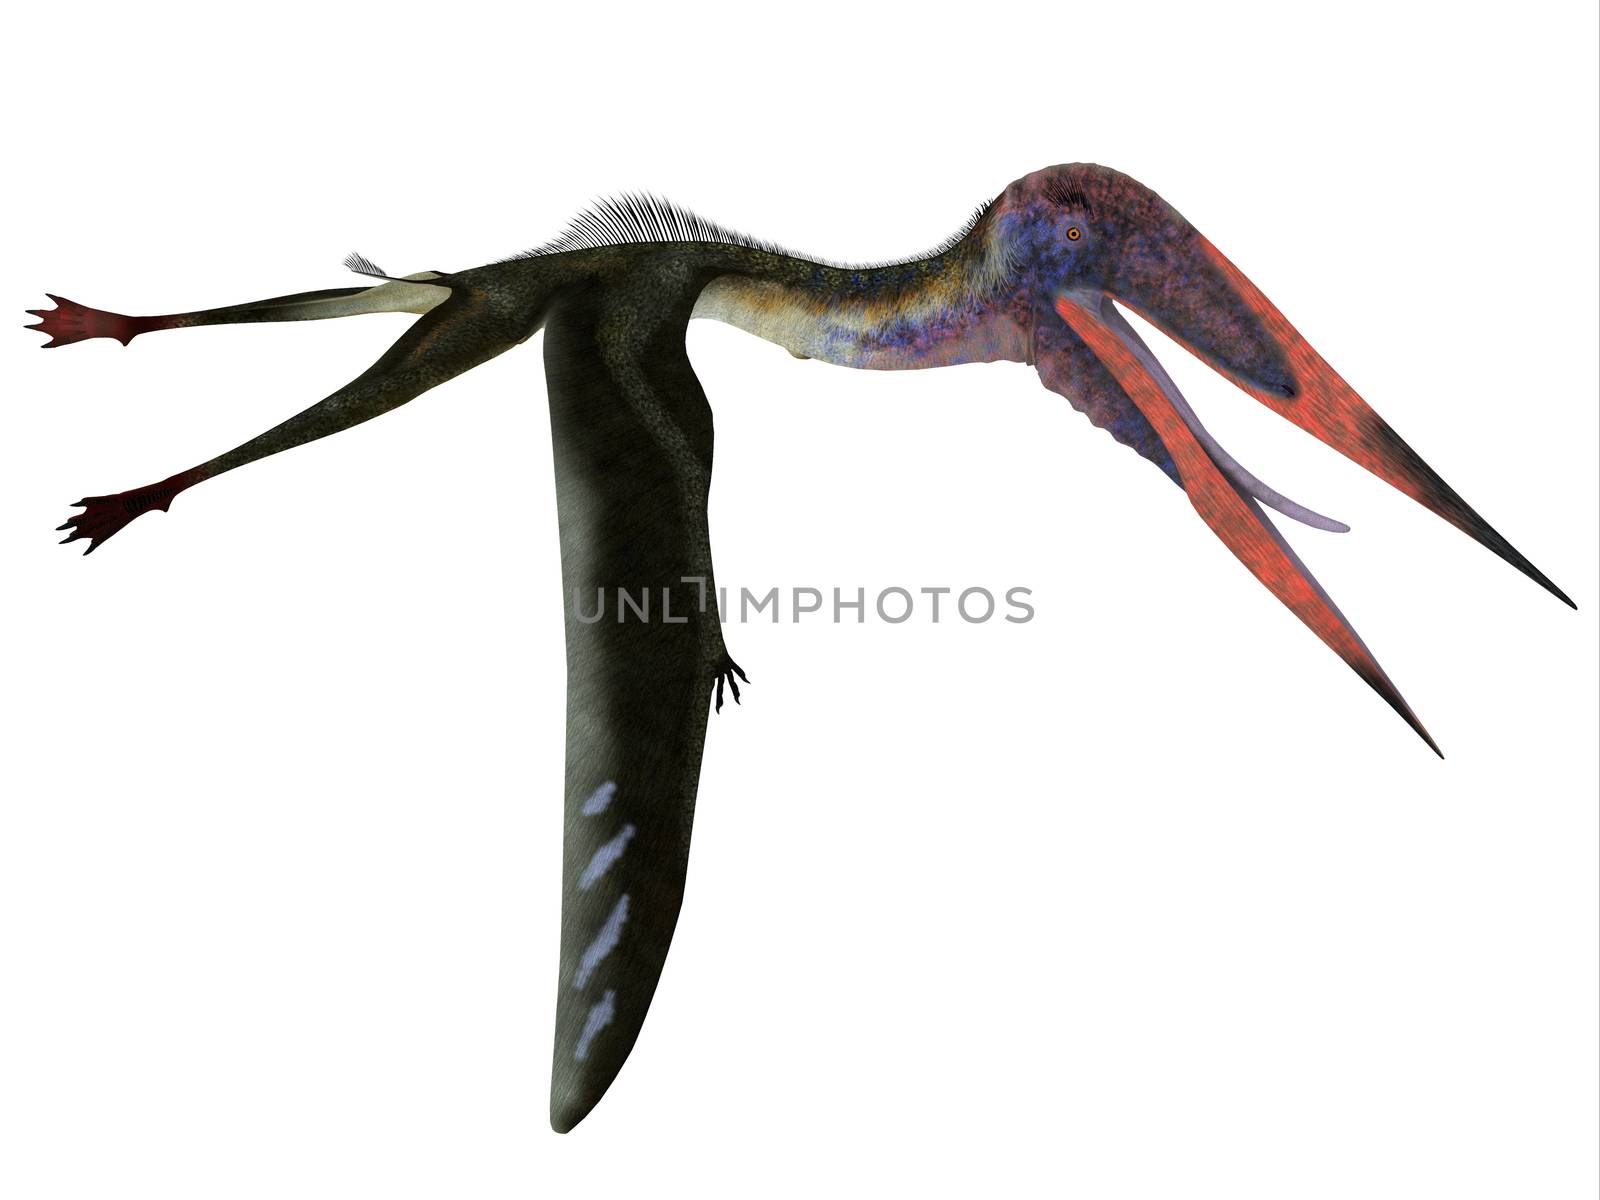 Zhejiangopterus was a carnivorous Pterosaur reptile that lived in China during the Cretaceous Period.